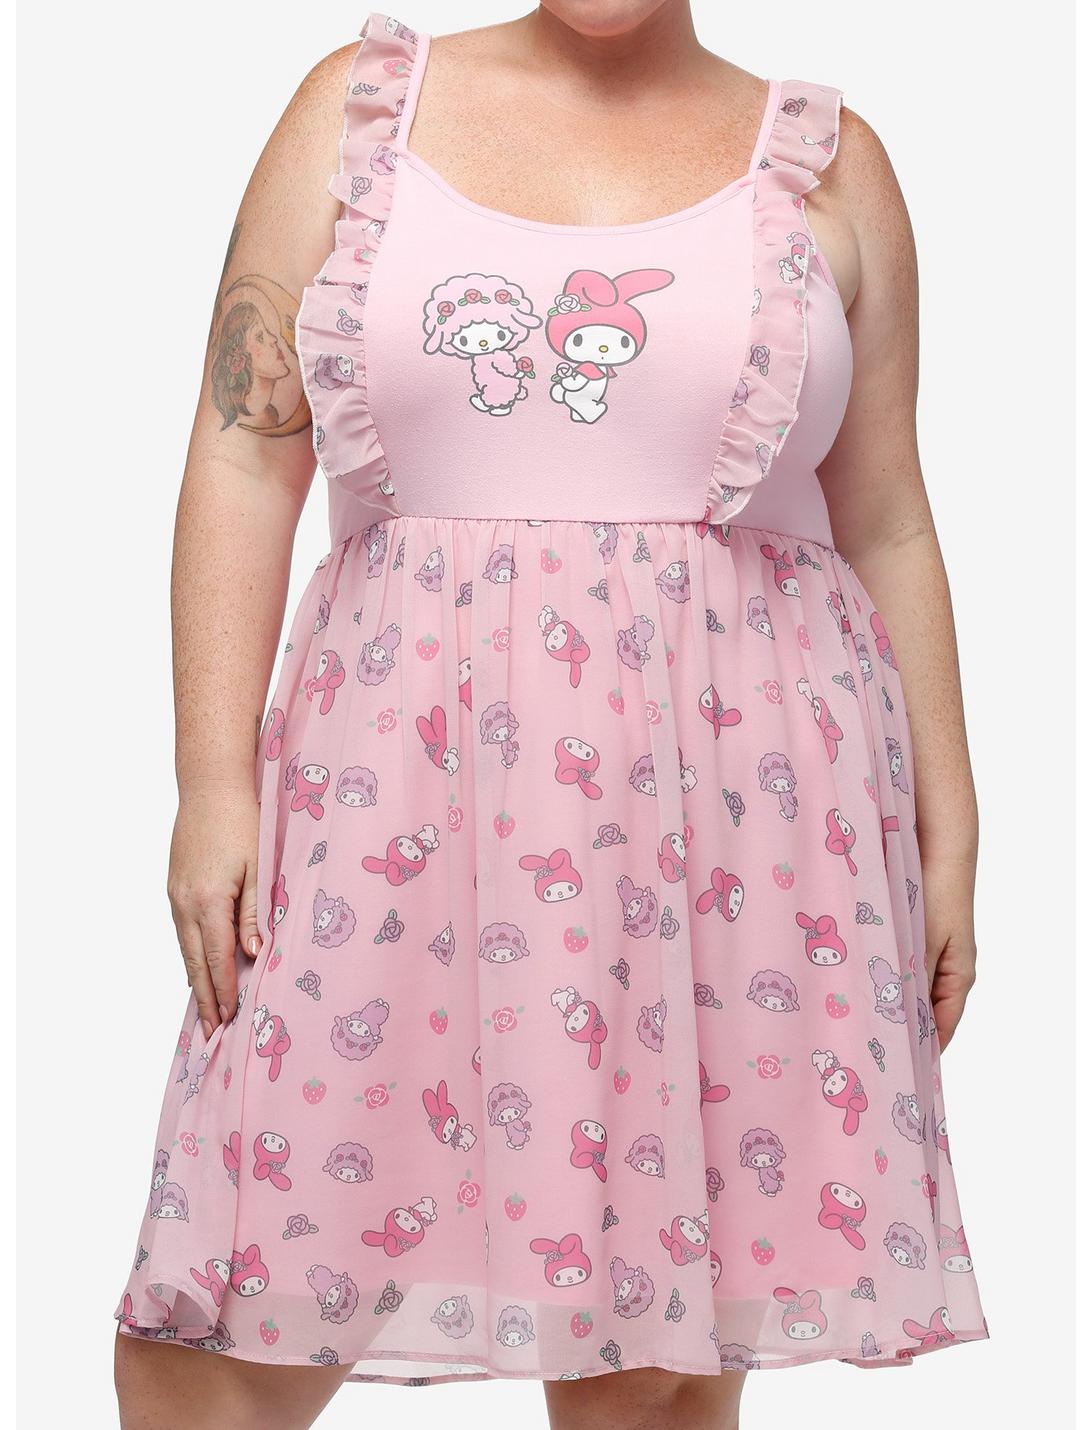 My Melody & My Sweet Piano Flutter Dress Plus Size, MULTI, hi-res